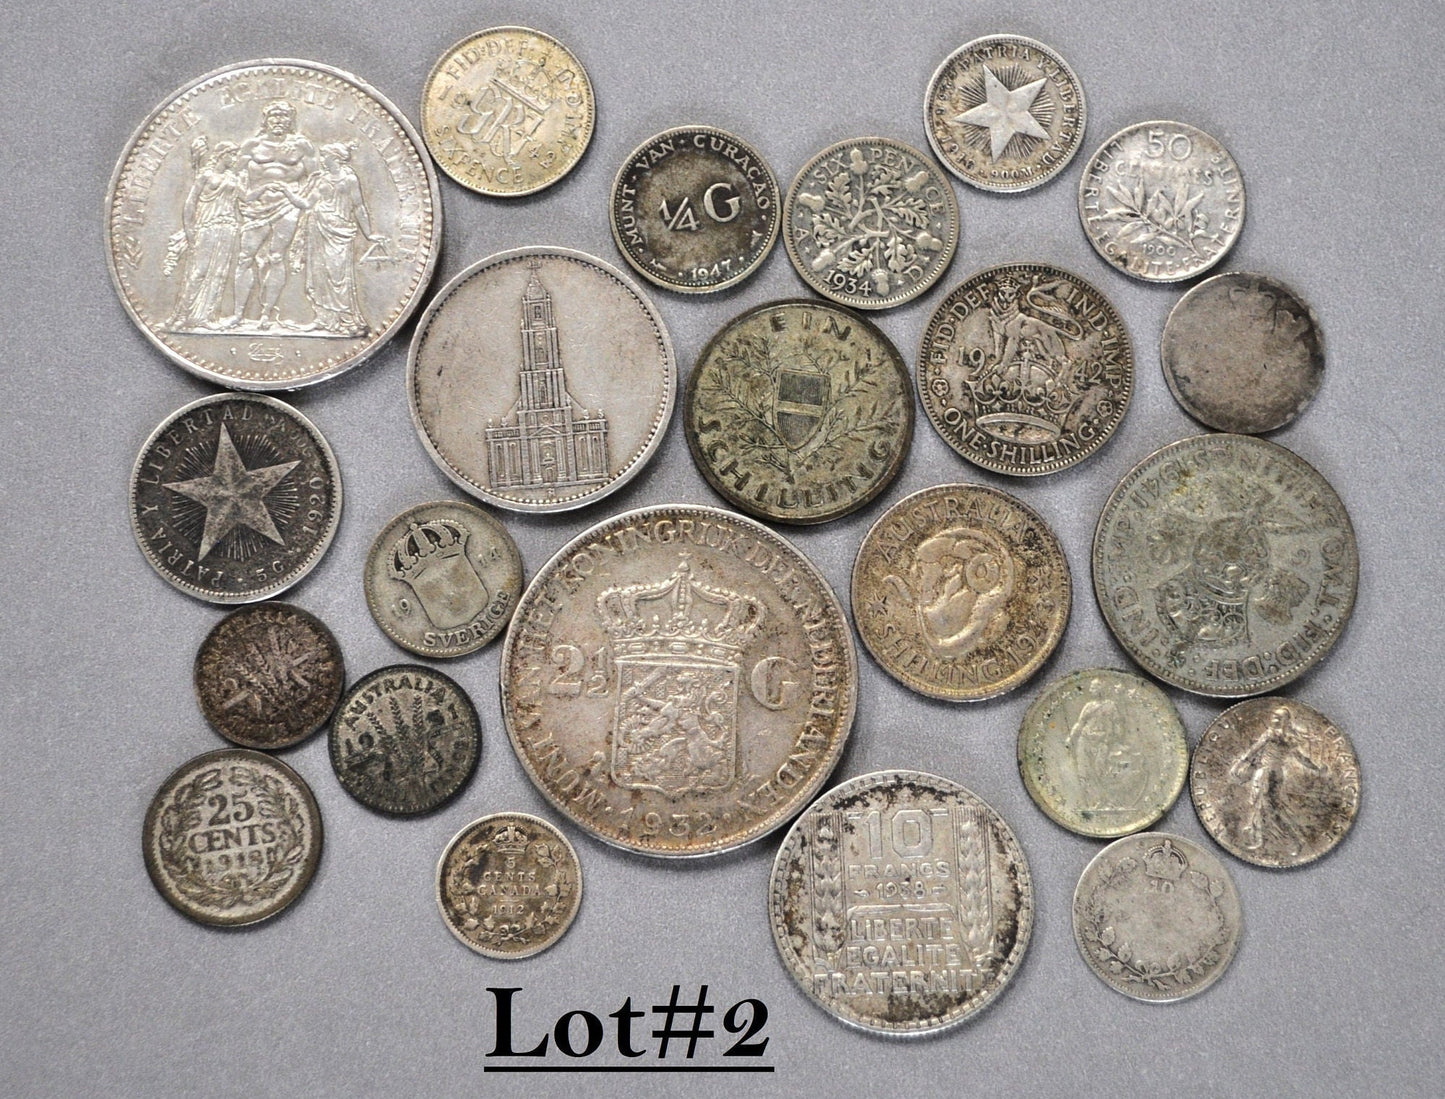 Lot of World Silver Coins - Multiple Lots Available, Check it out! - Cool / Unique Silver Coin Lot - Old Silver Coins - Large Coin Lot!